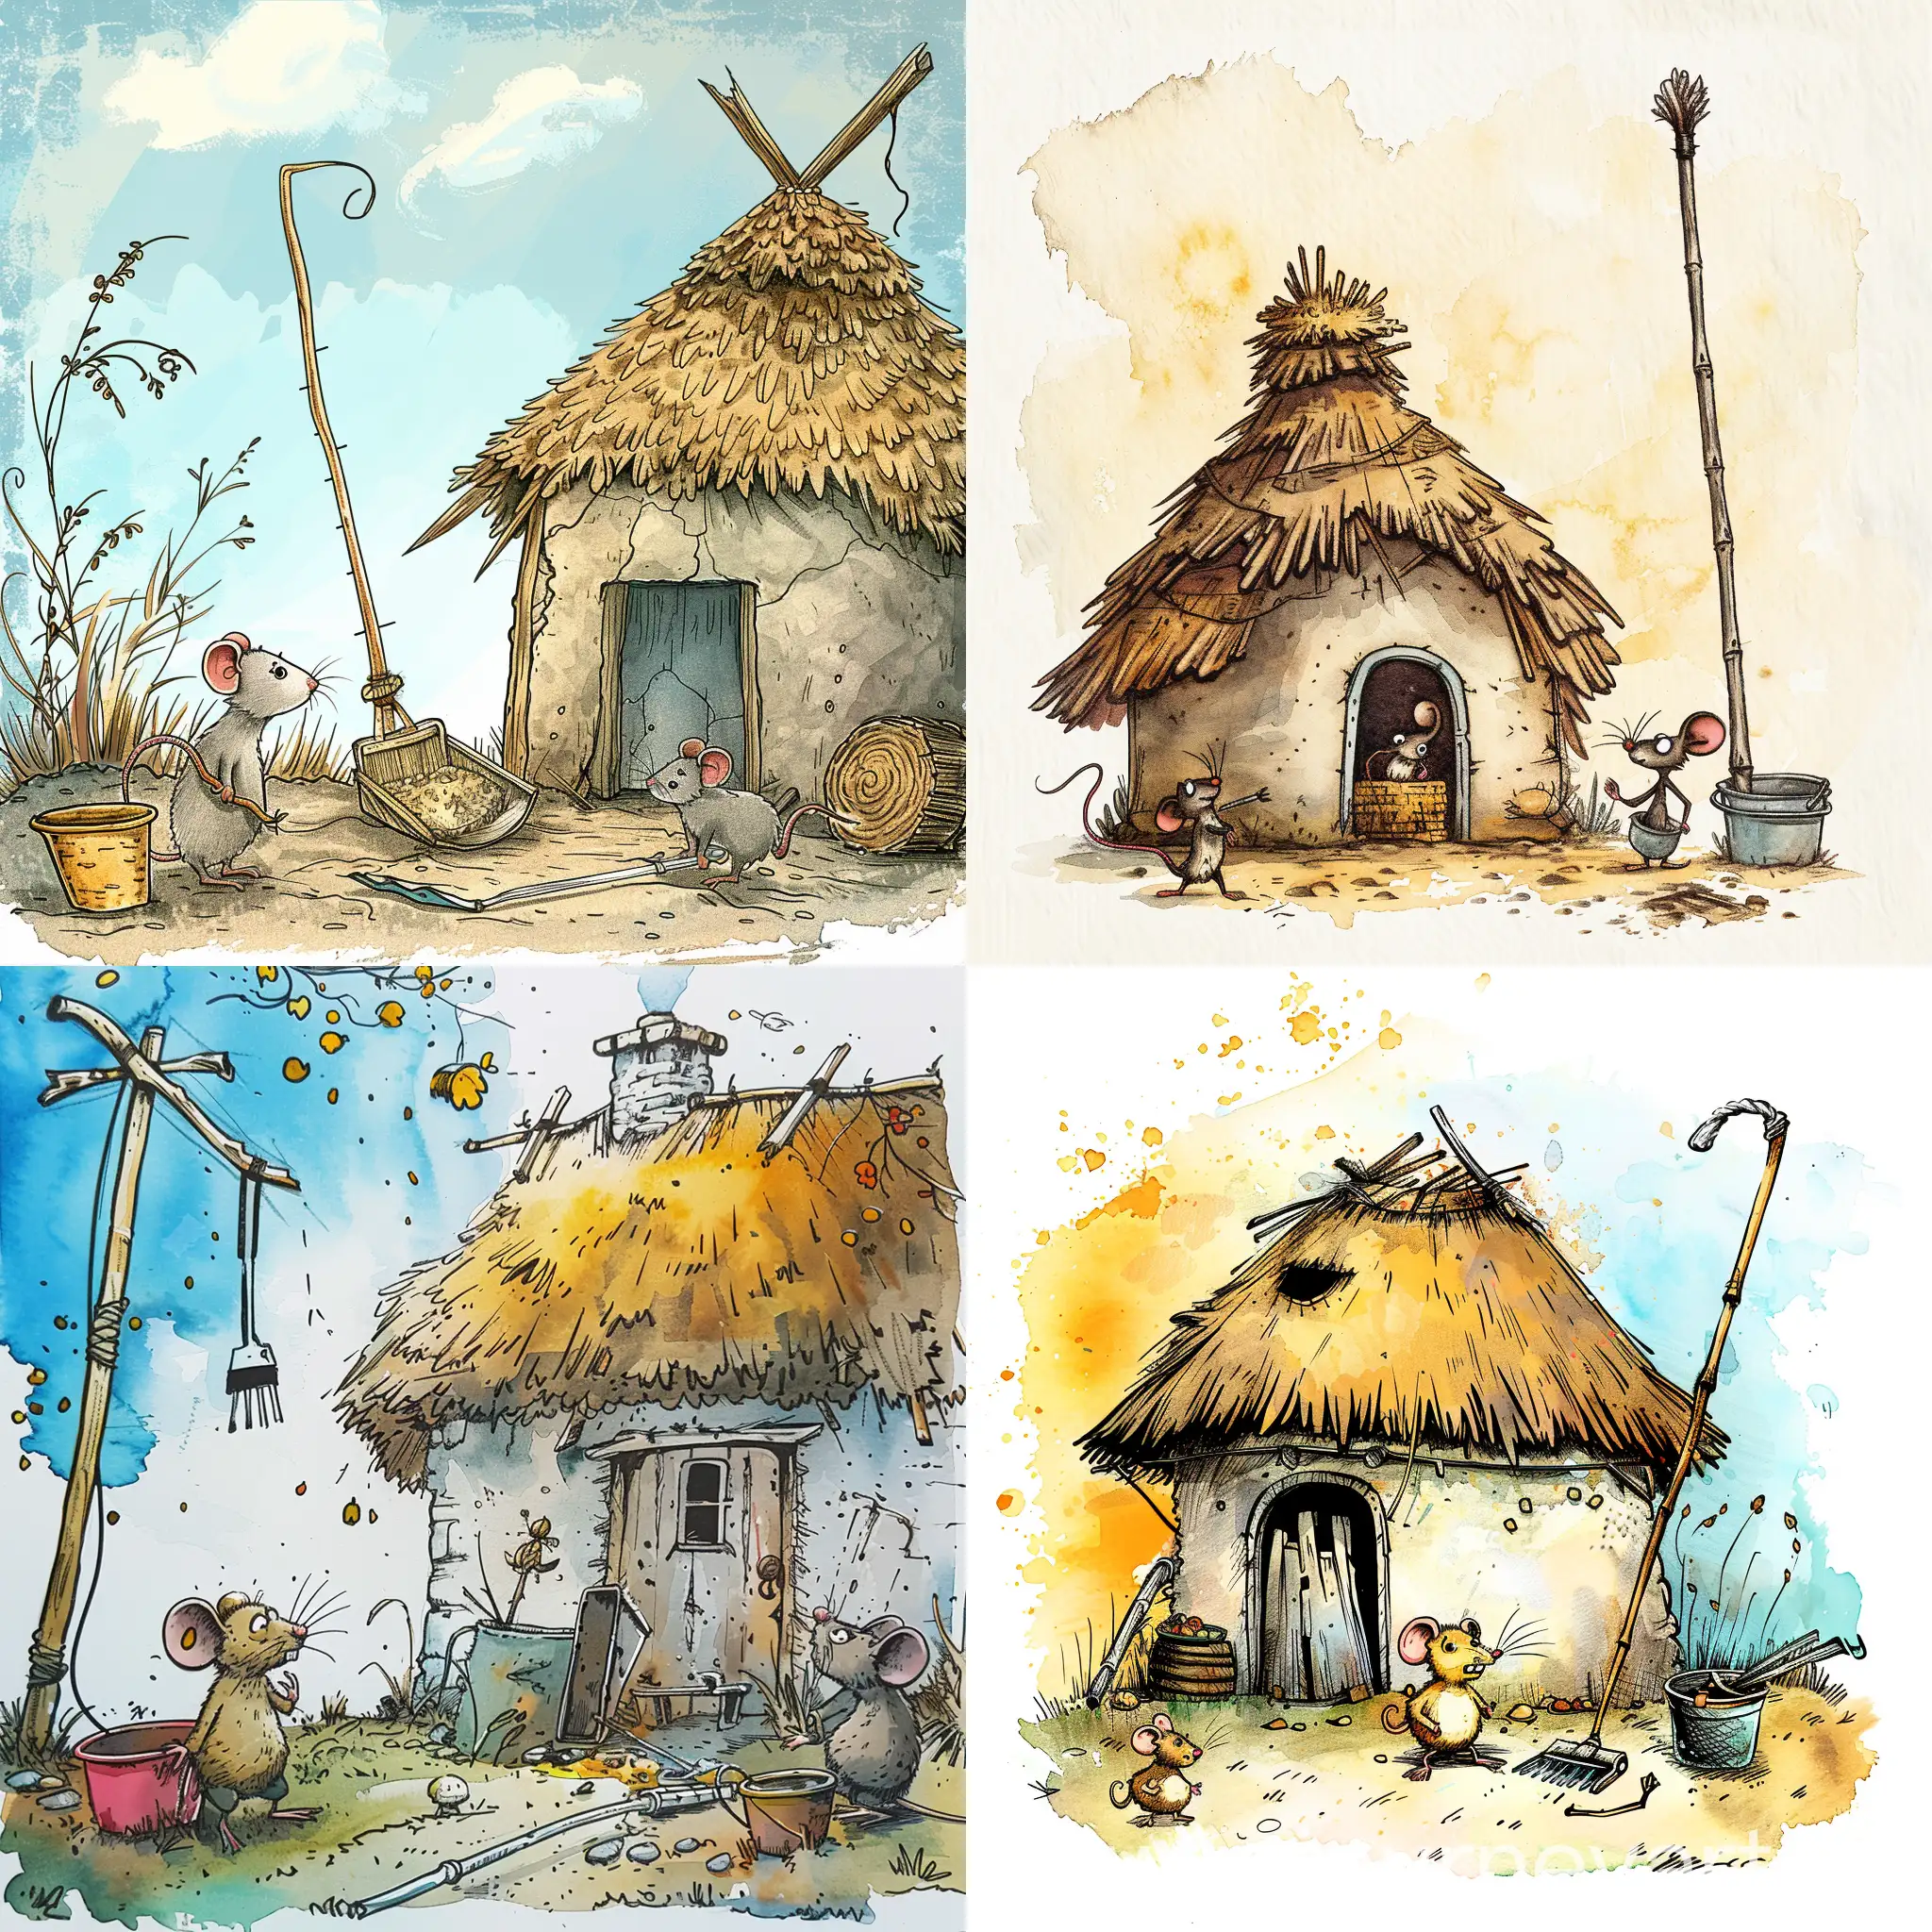 Inspired by fairy tales, this minimalist drawing sketch features a thatched house, a mouse (talking to his friends, a pole, a broken dustpan and a bucket), a colourful background design and whimsical characters to catch the eye and spark the imagination of young readers. Simple, Illustration, Watercolour, Rough, Cute, Webtoon Style